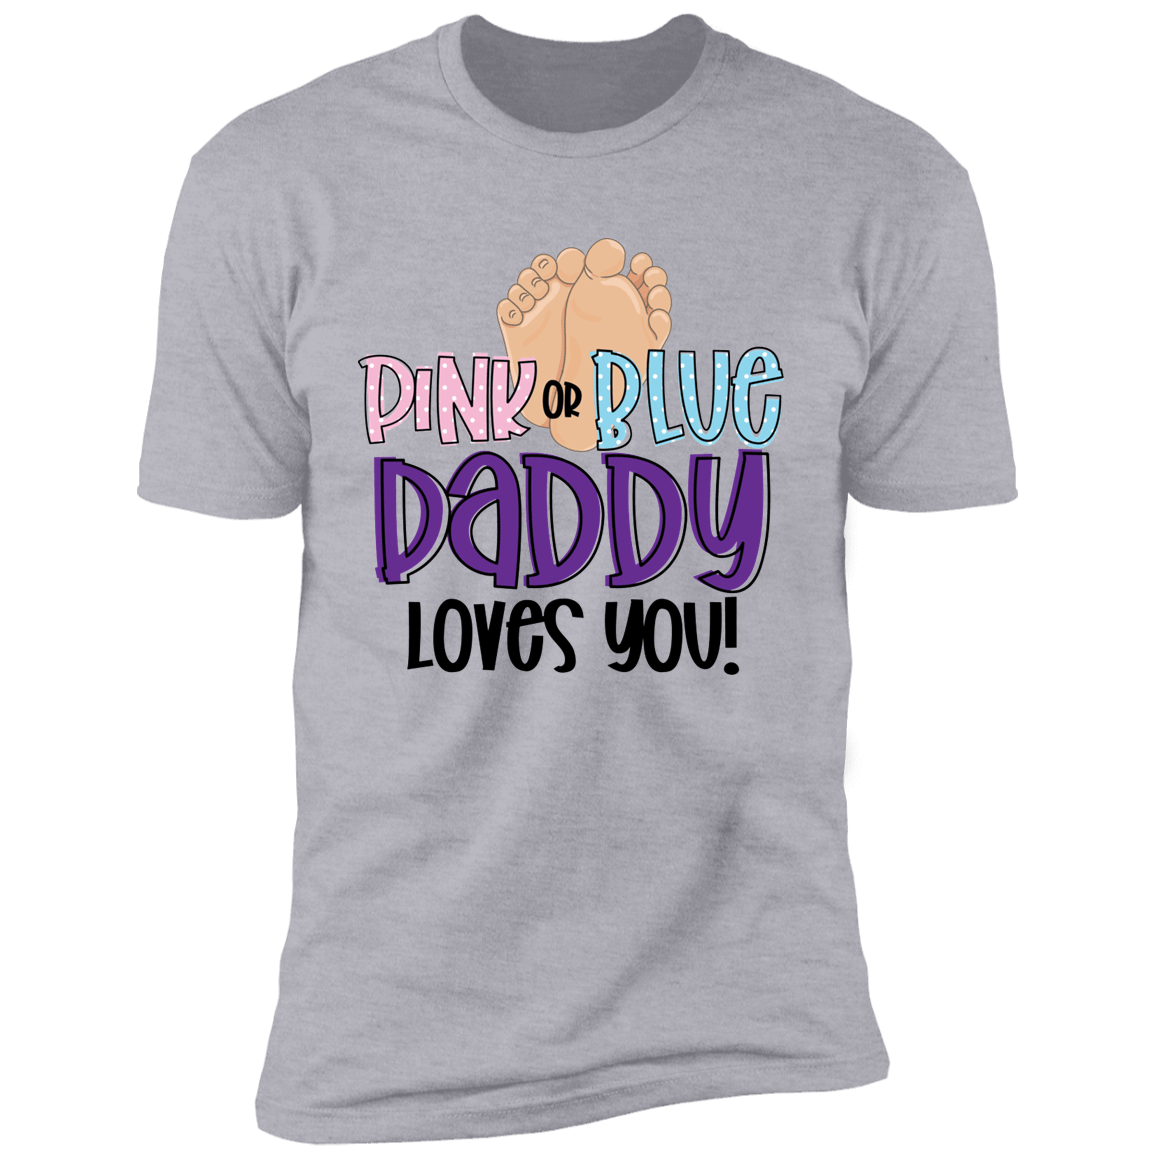 Pink Or Blue Daddy Loves You!